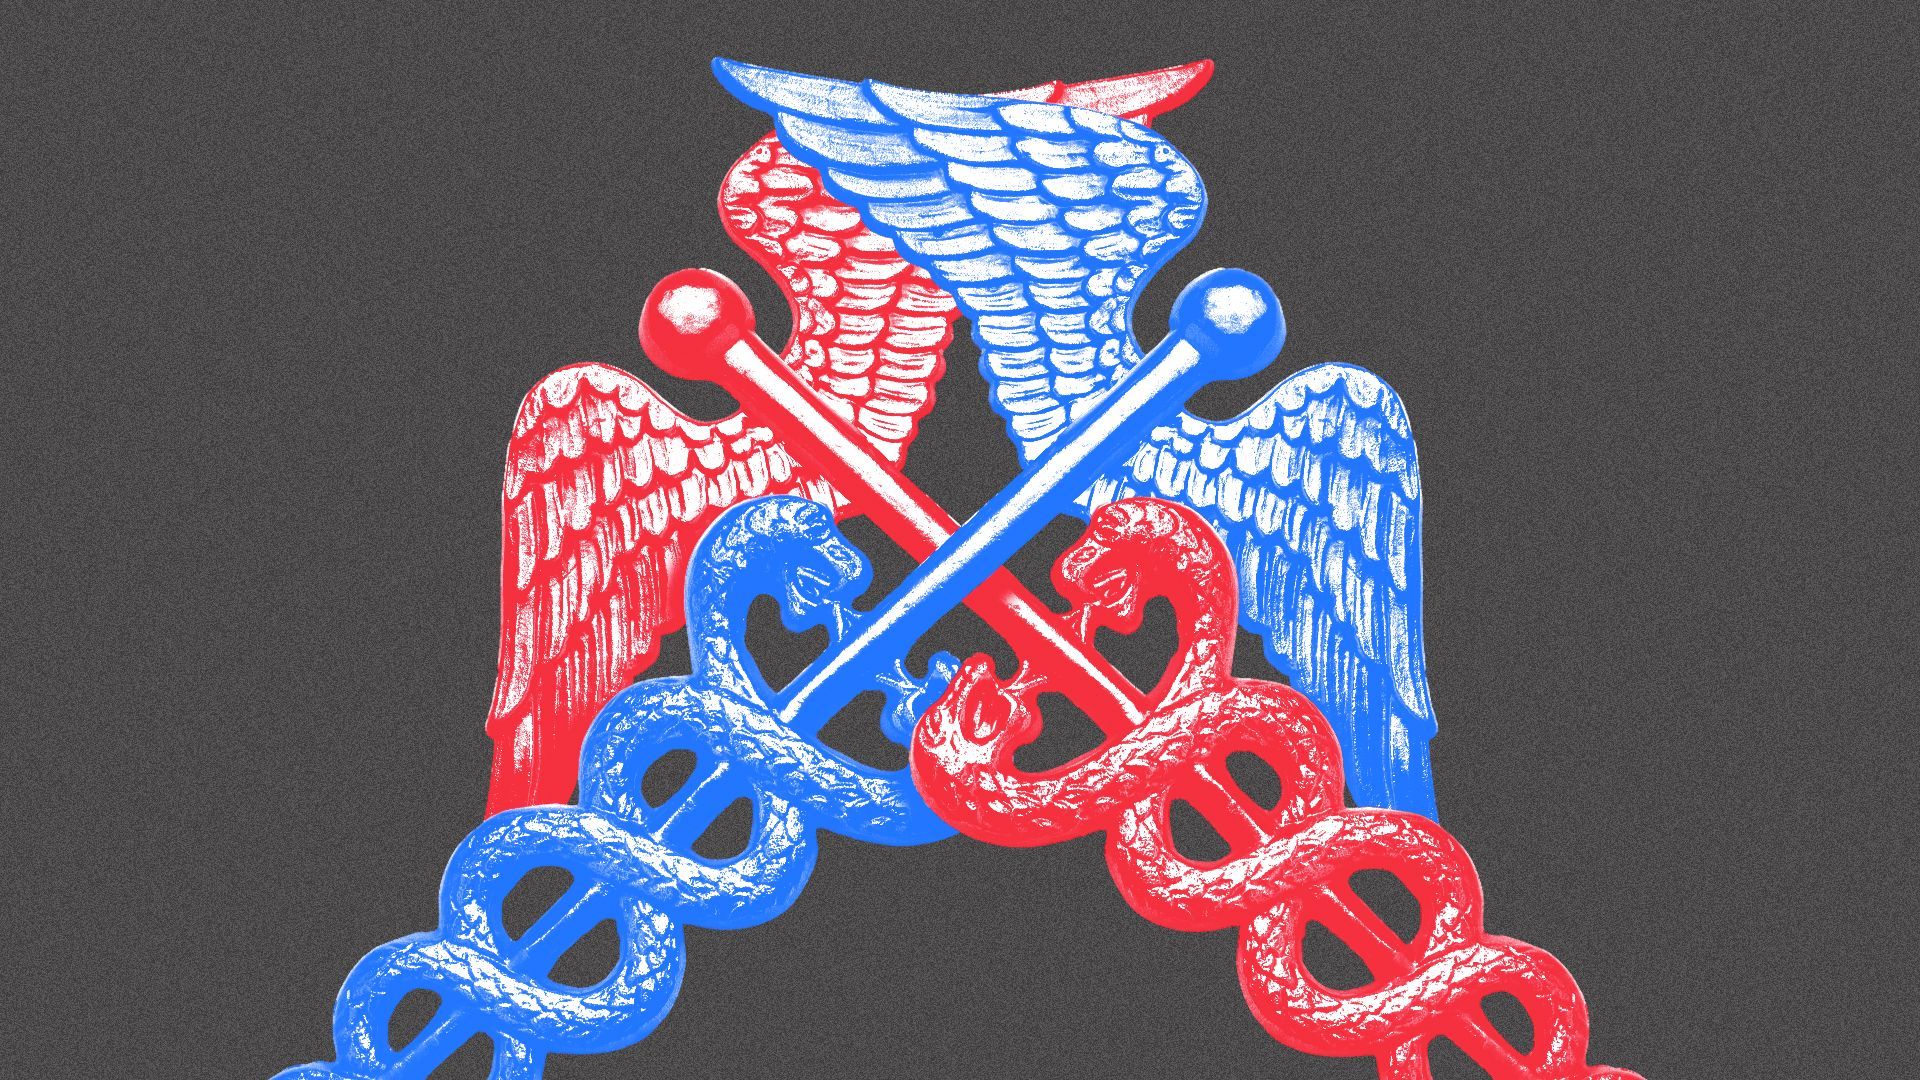 Illustration of a red caduceus crossed with a blue caduceus.